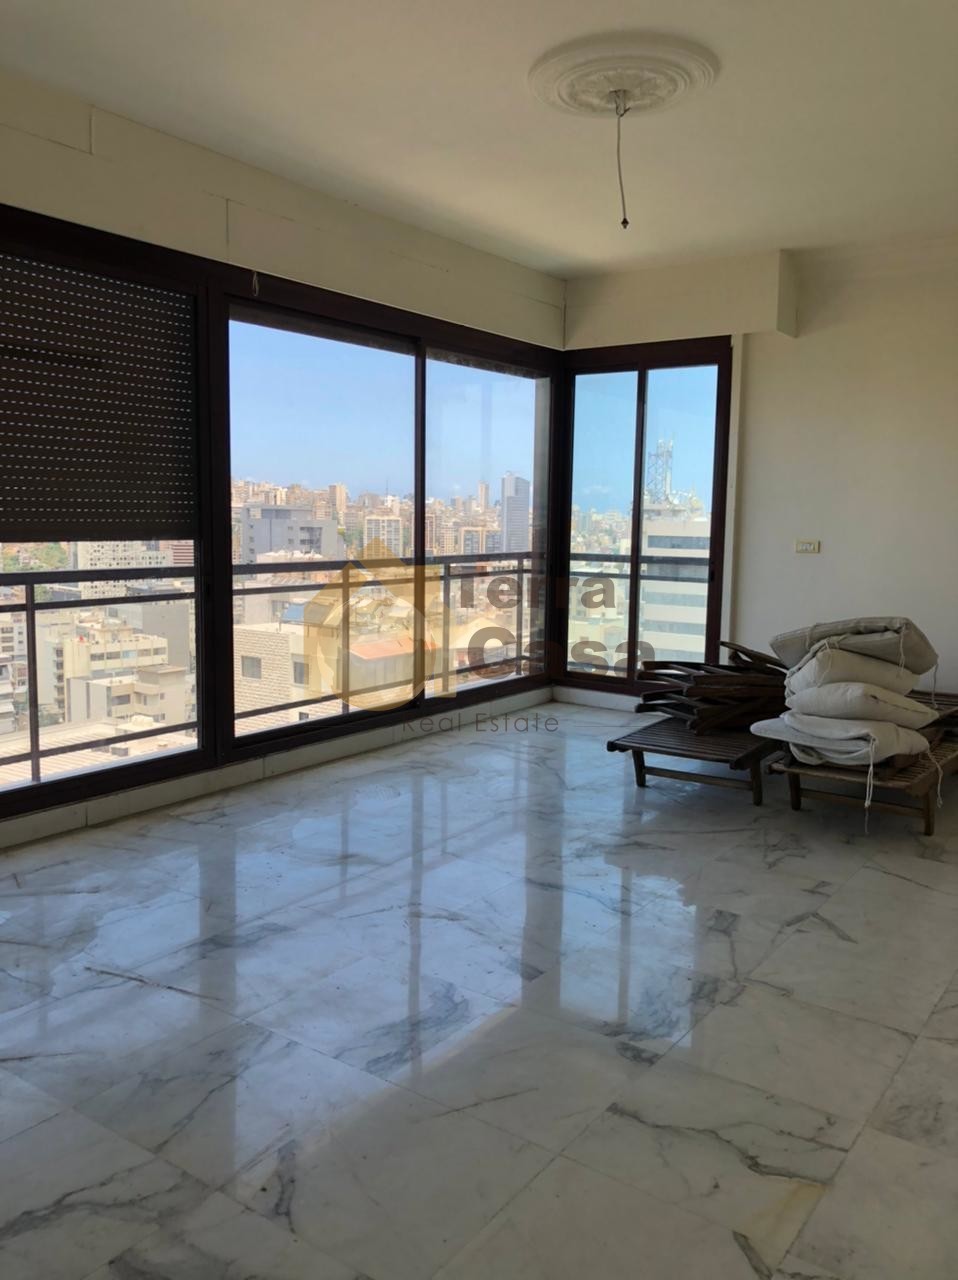 Luxurious apartment shared pool cash payment open view.